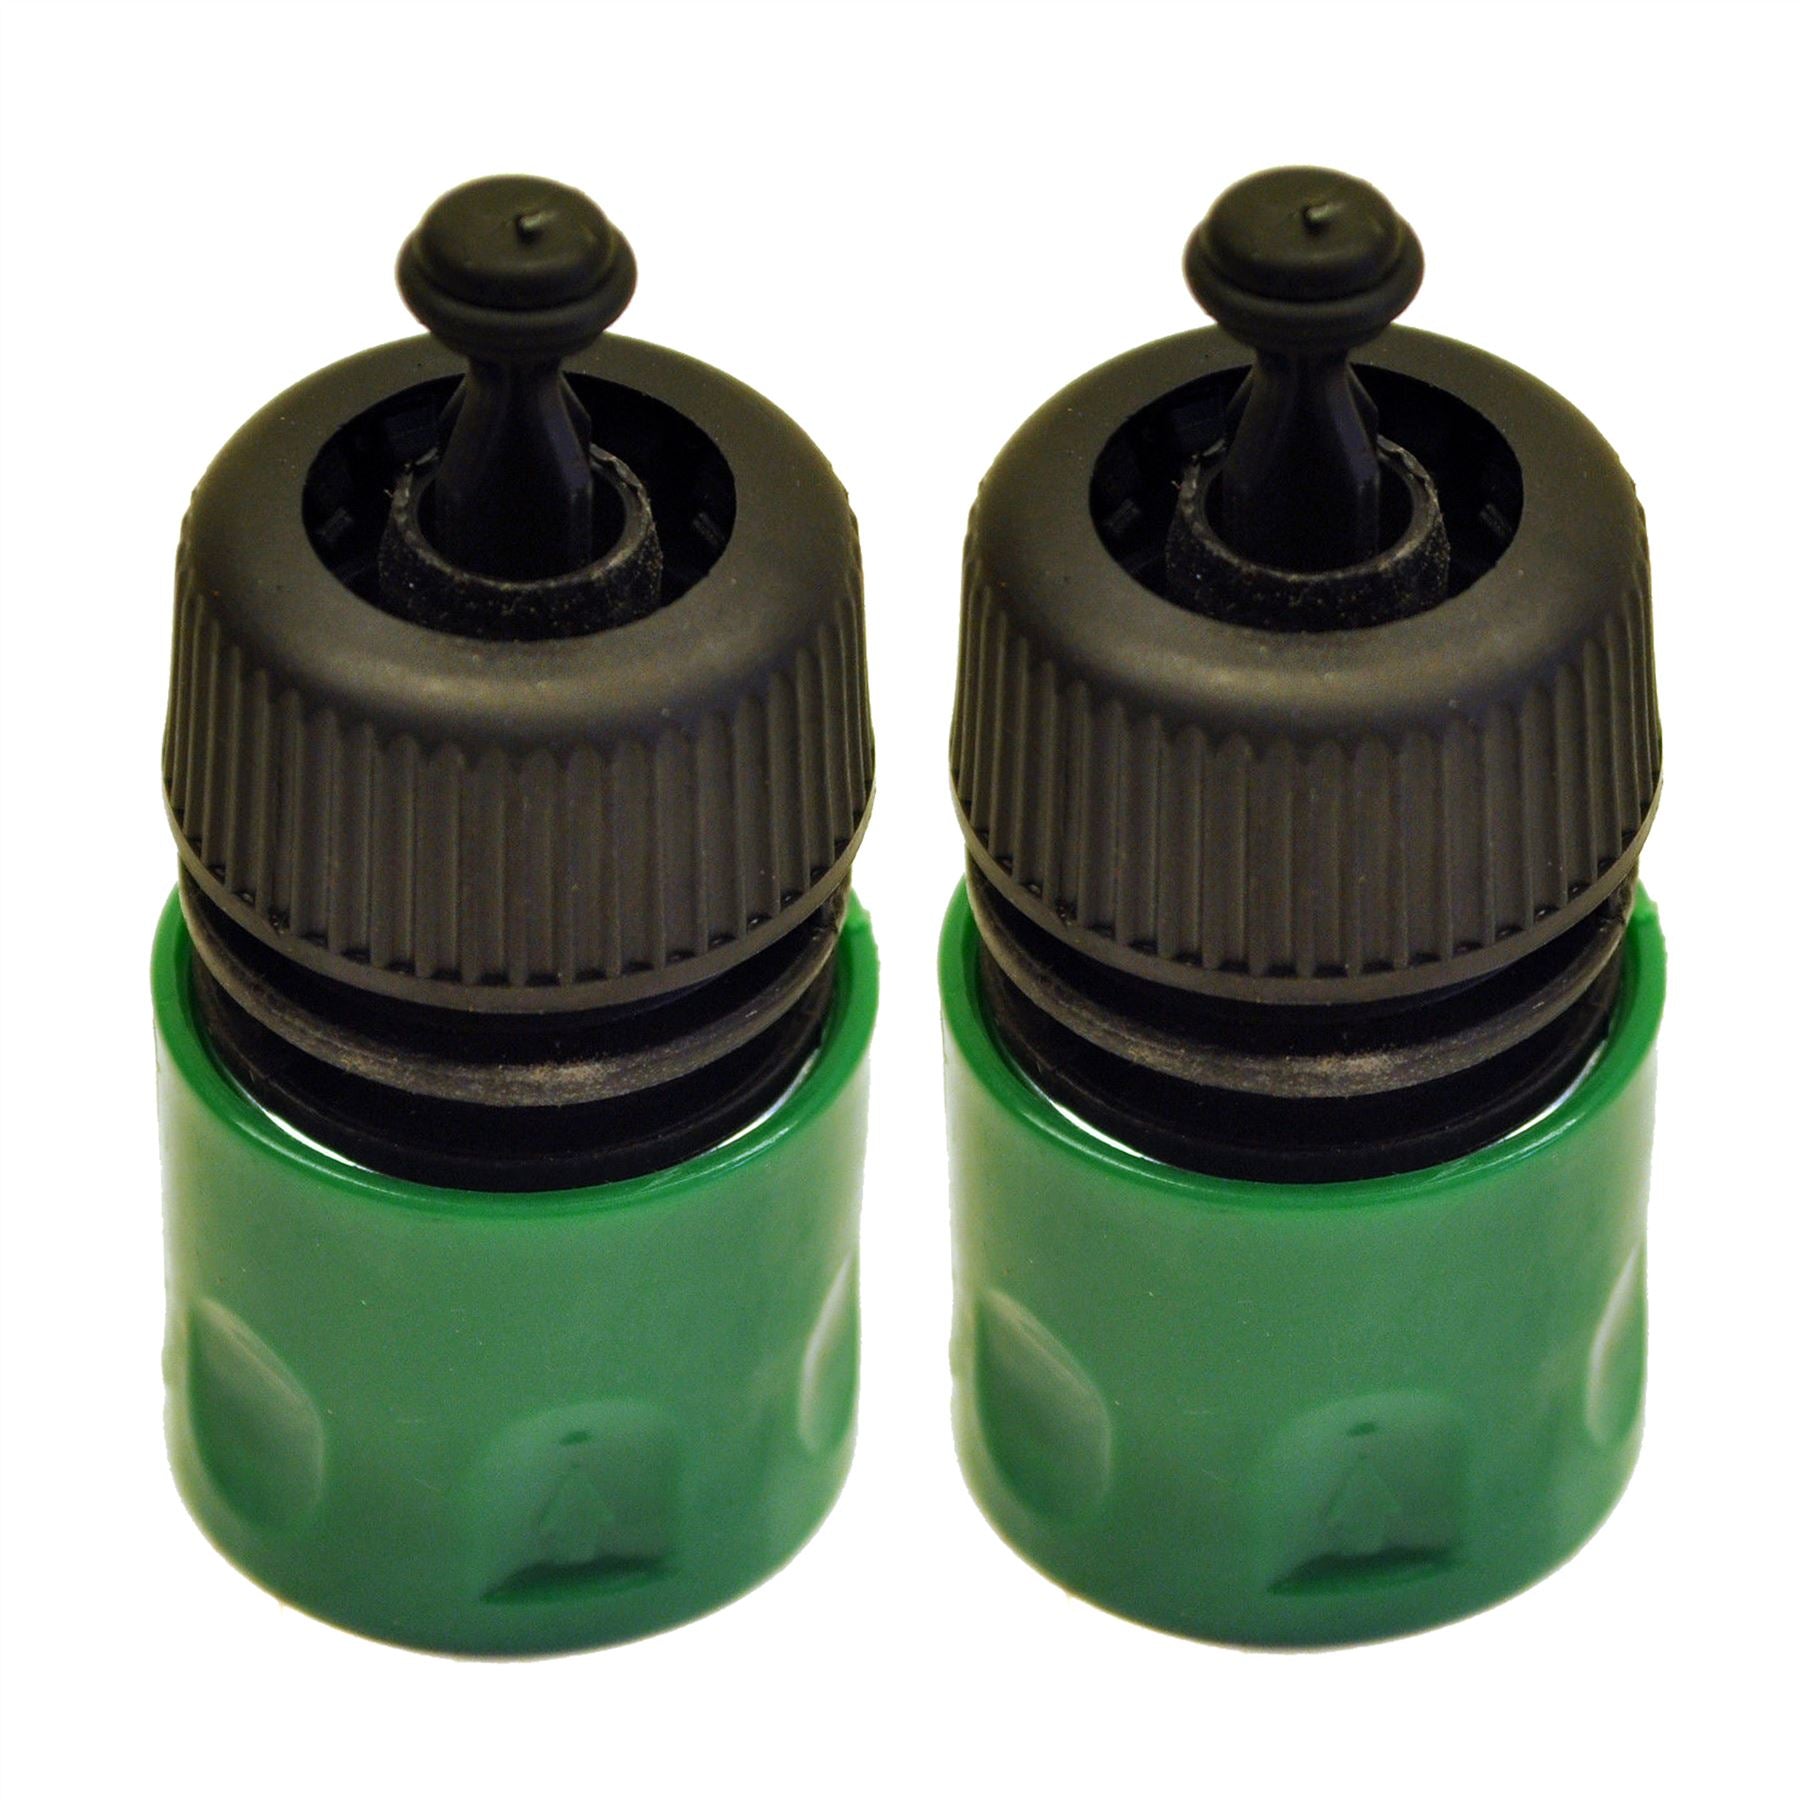 1/2" Quick Release Garden Hose Female Pipe Adapter With Stop Lock Fitting 2 Pack